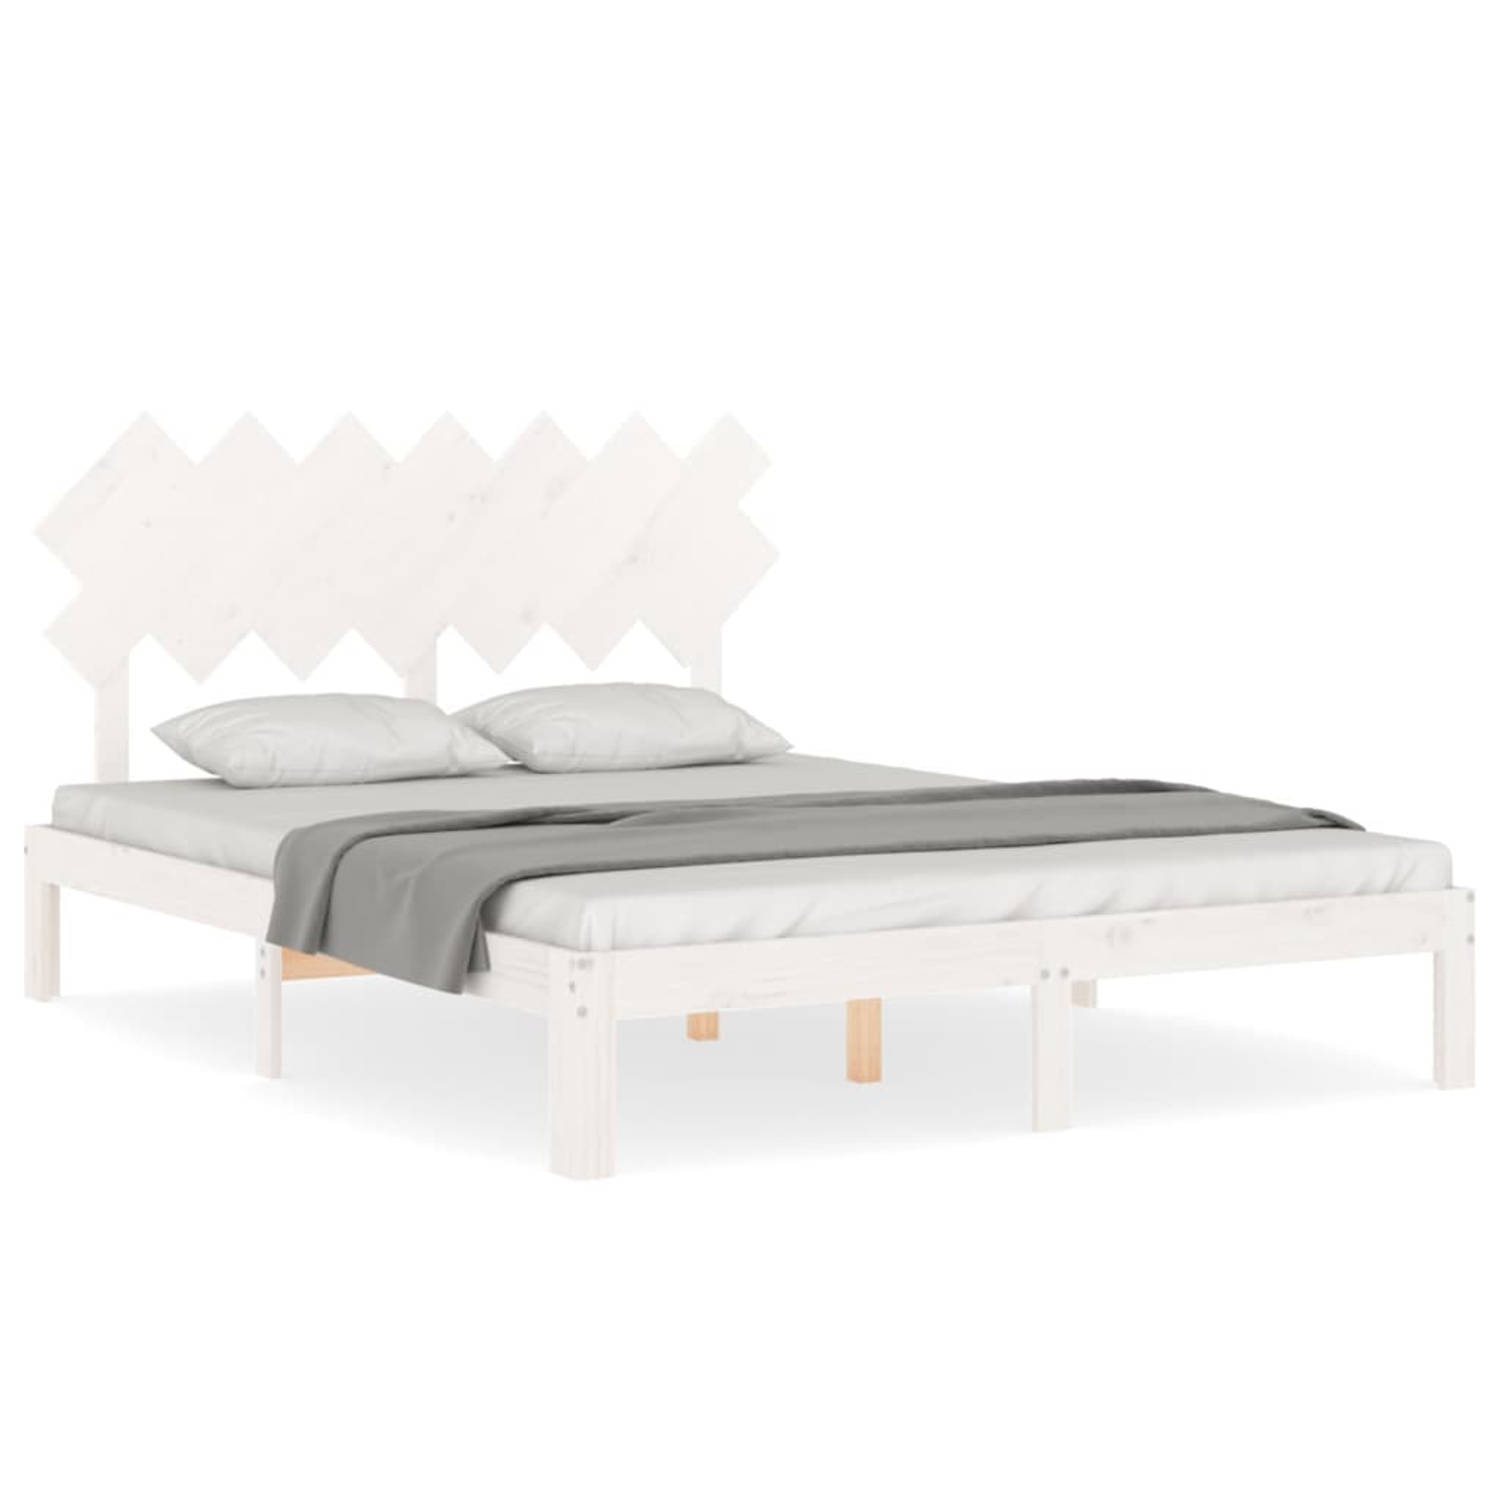 The Living Store Bedframe - Massief grenenhout - Wit - 193.5 x 143.5 x 80.5 cm